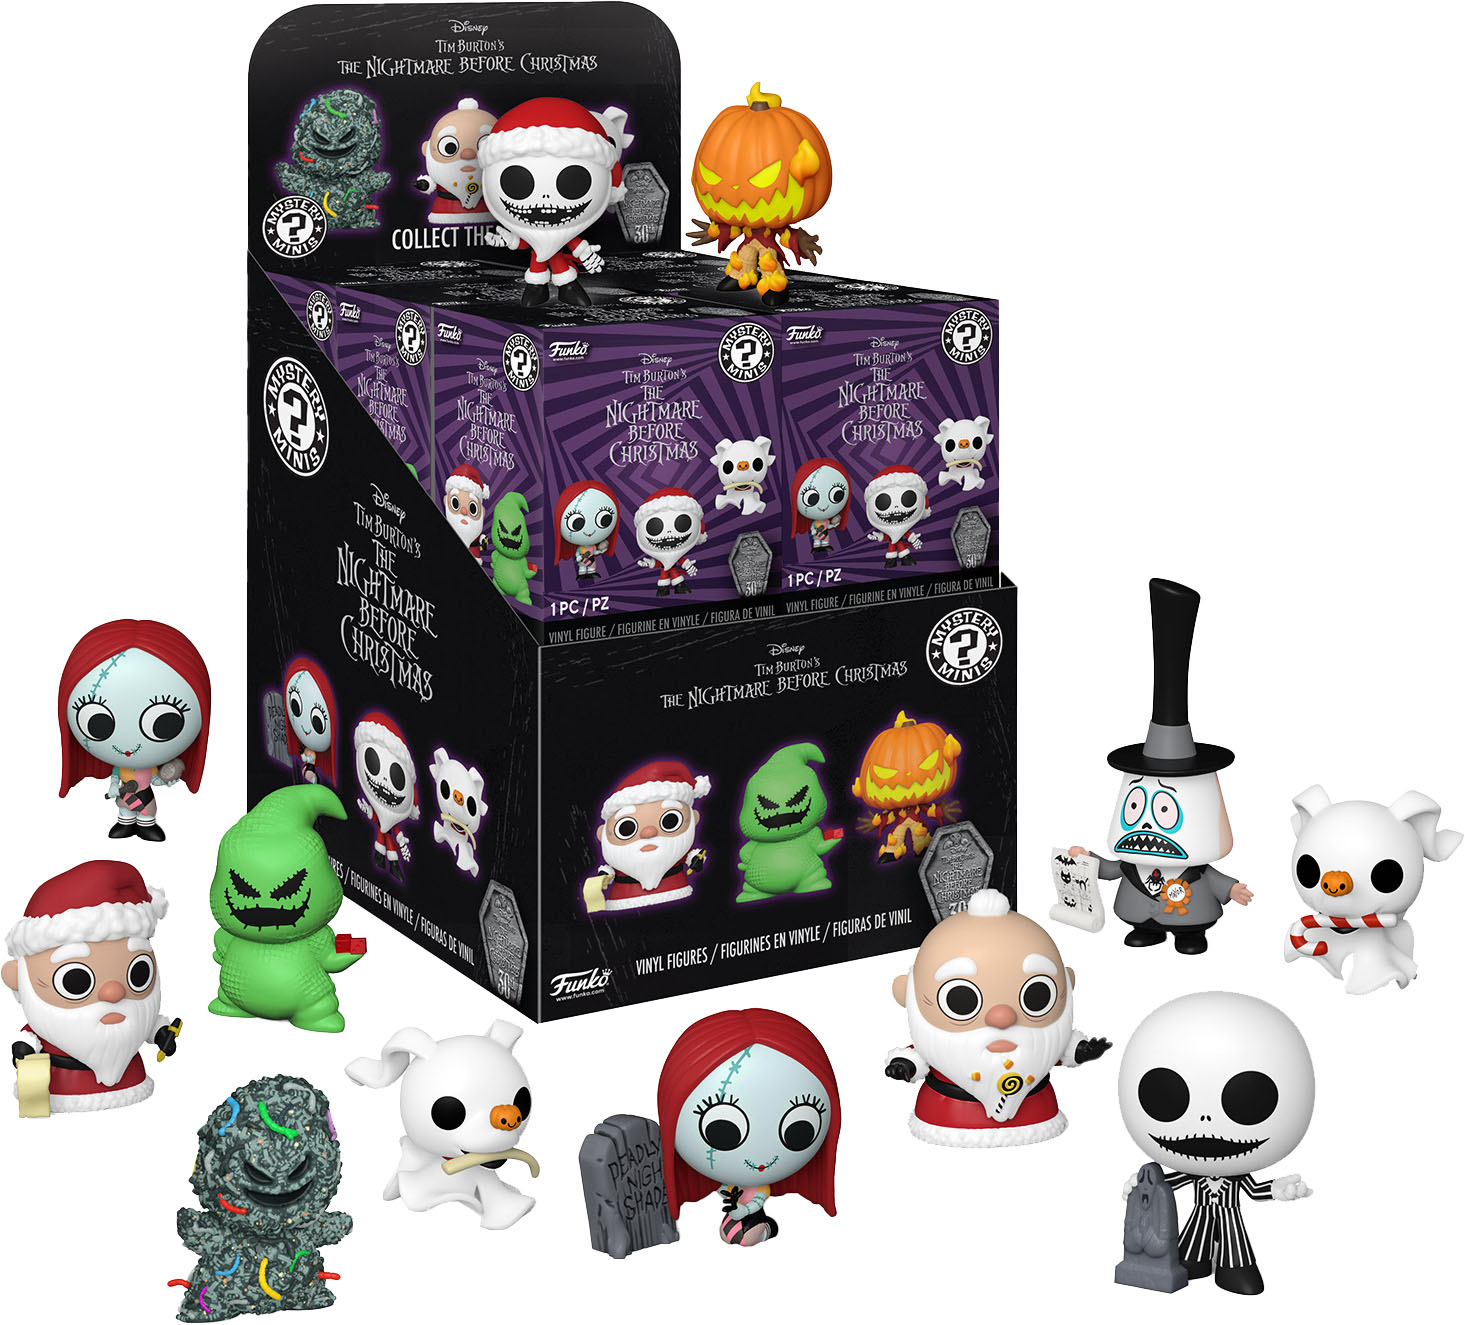 Buy Bitty Pop! The Nightmare Before Christmas 4-Pack Series 4 at Funko.